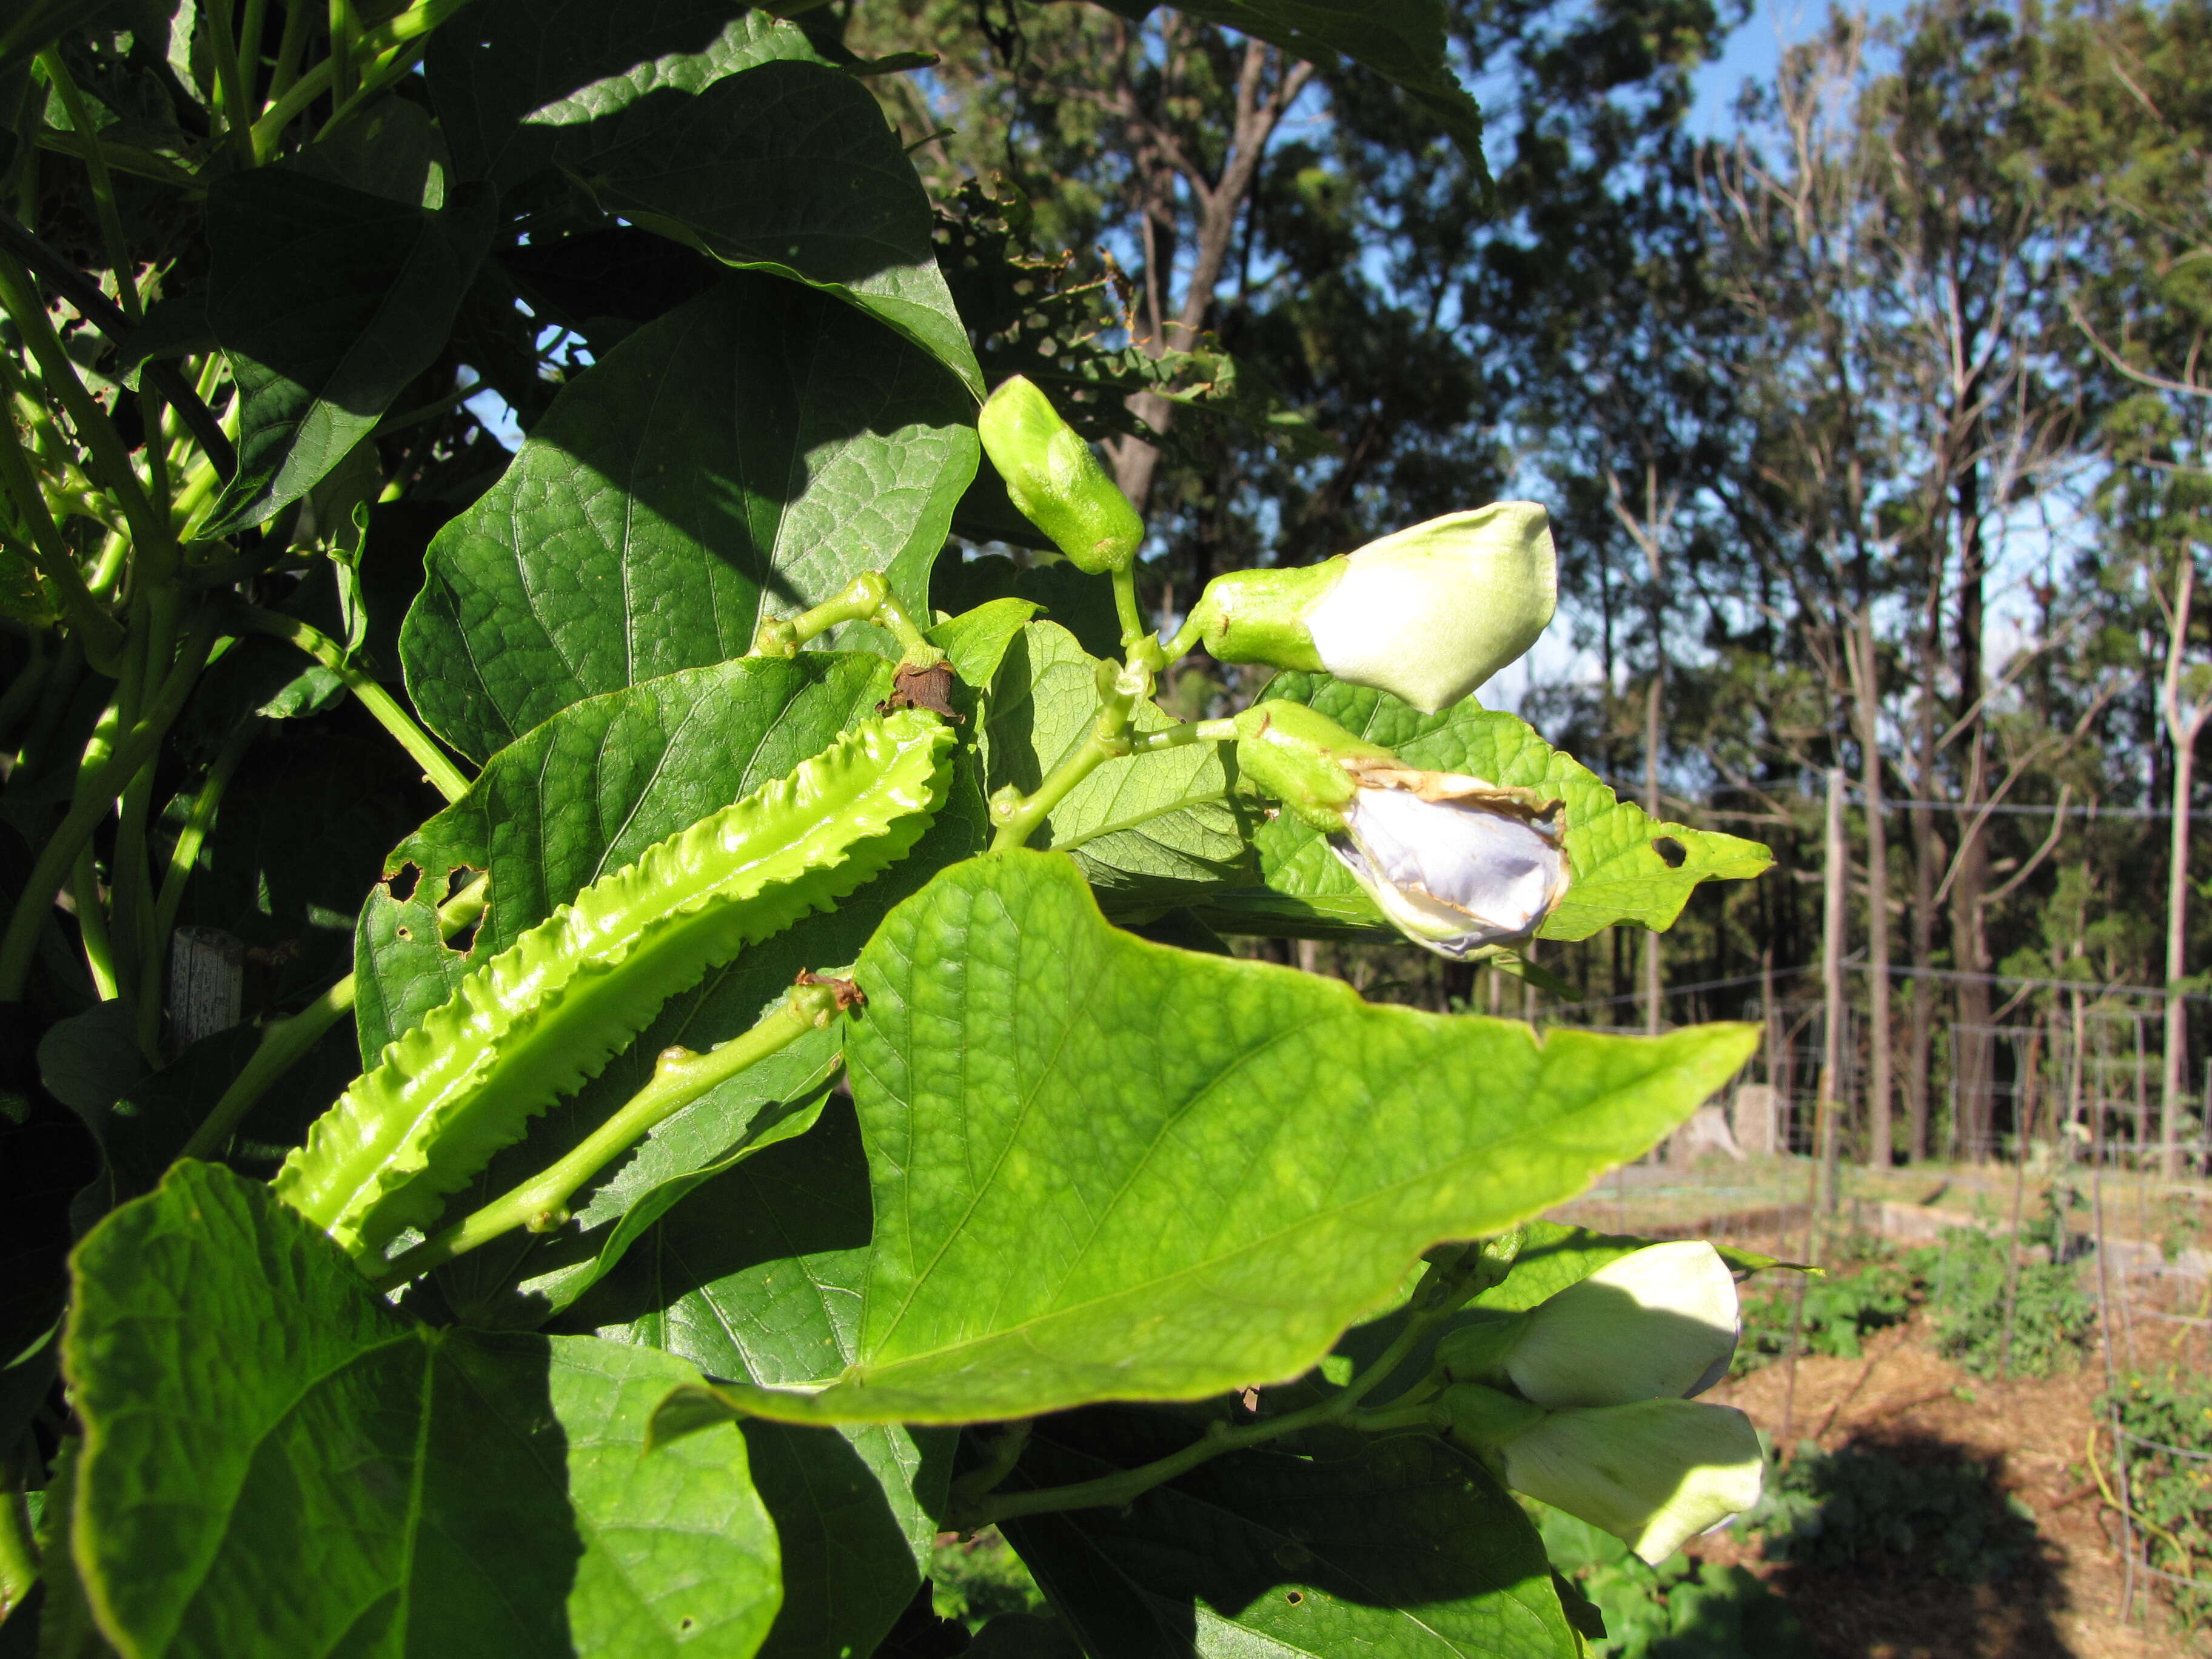 Image of winged bean